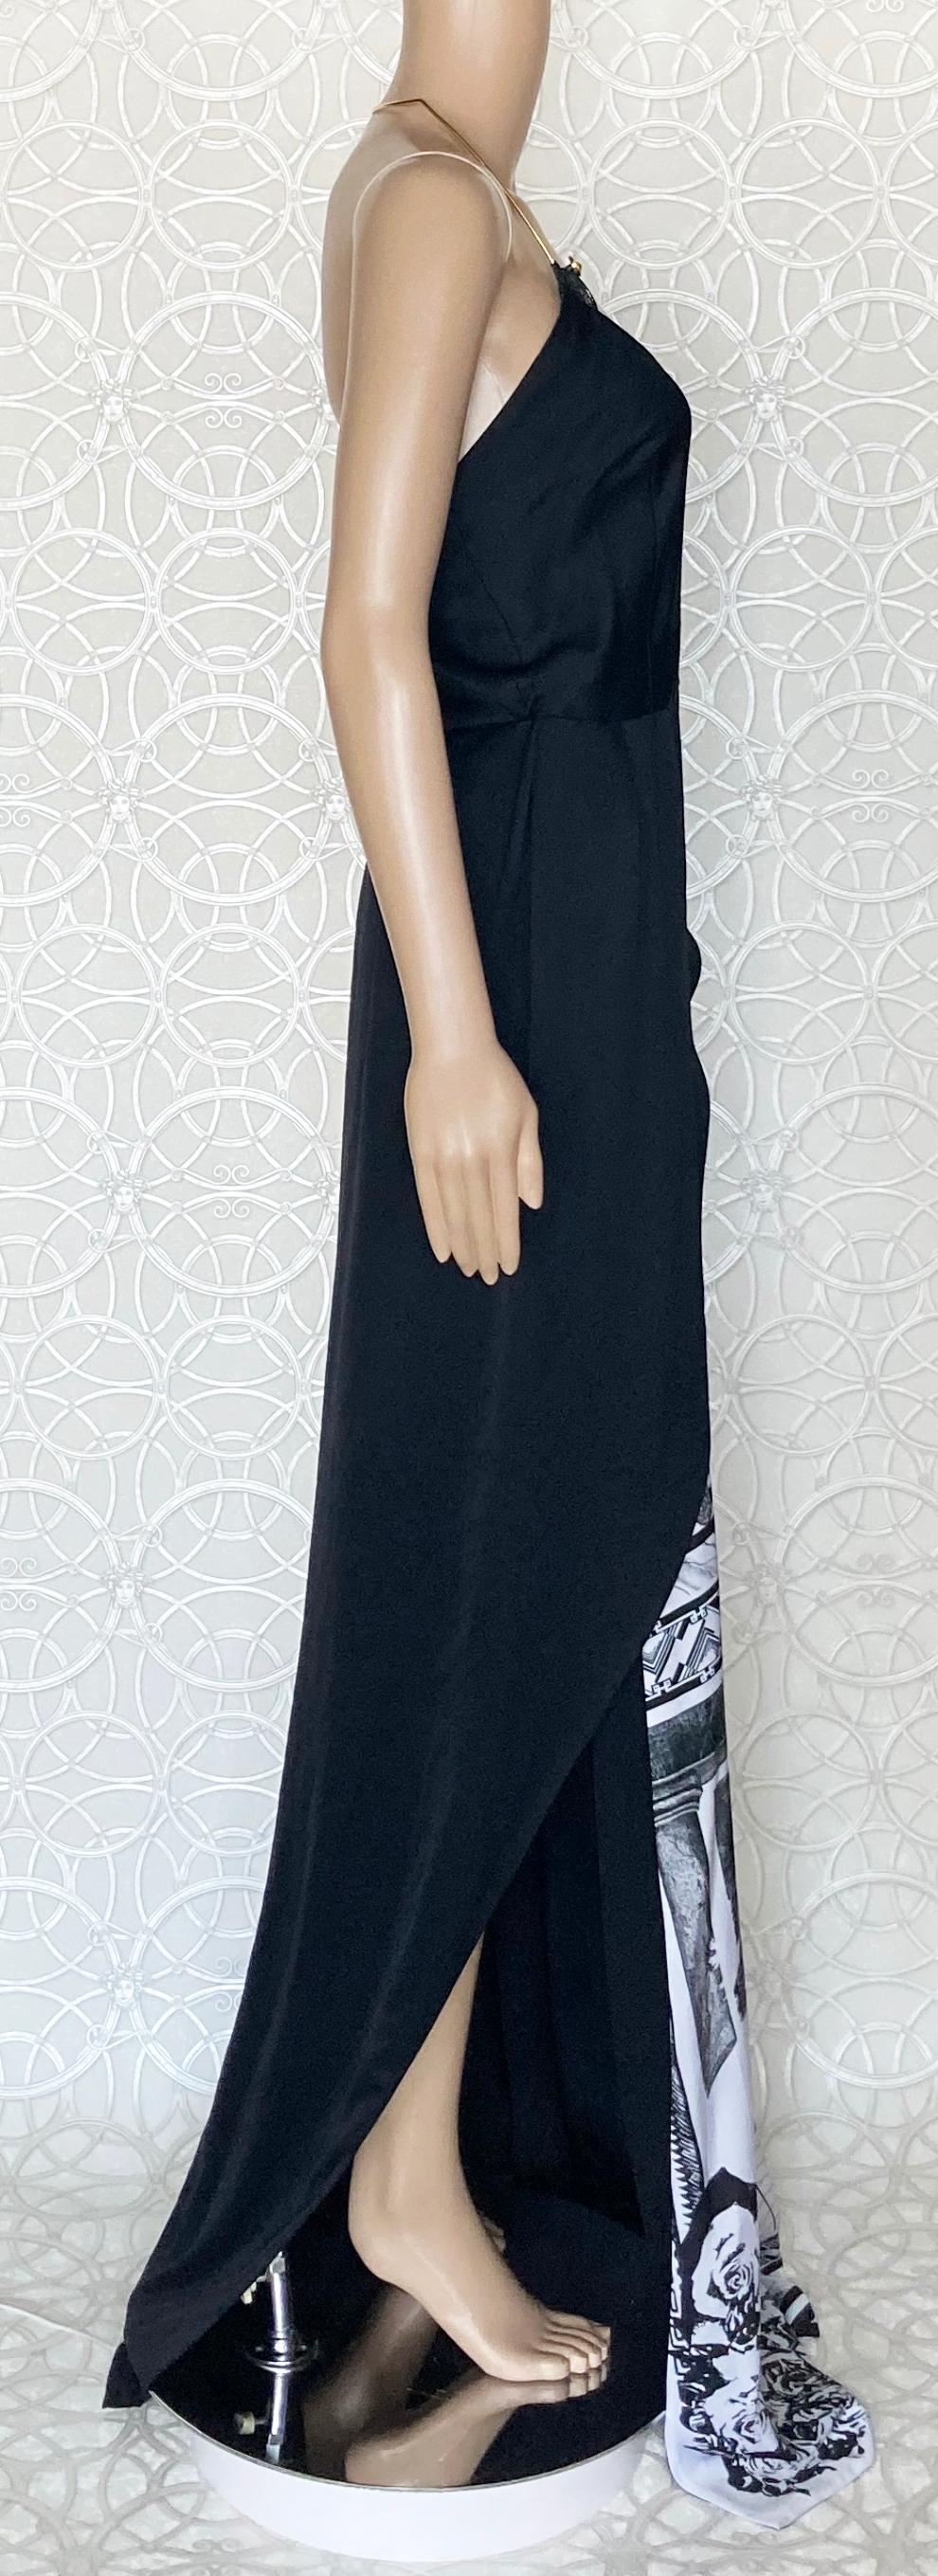 Versace VERSUS + Anthony Vaccarello iconic print maxi dress 38 - 2, 42 - 6 For Sale 7